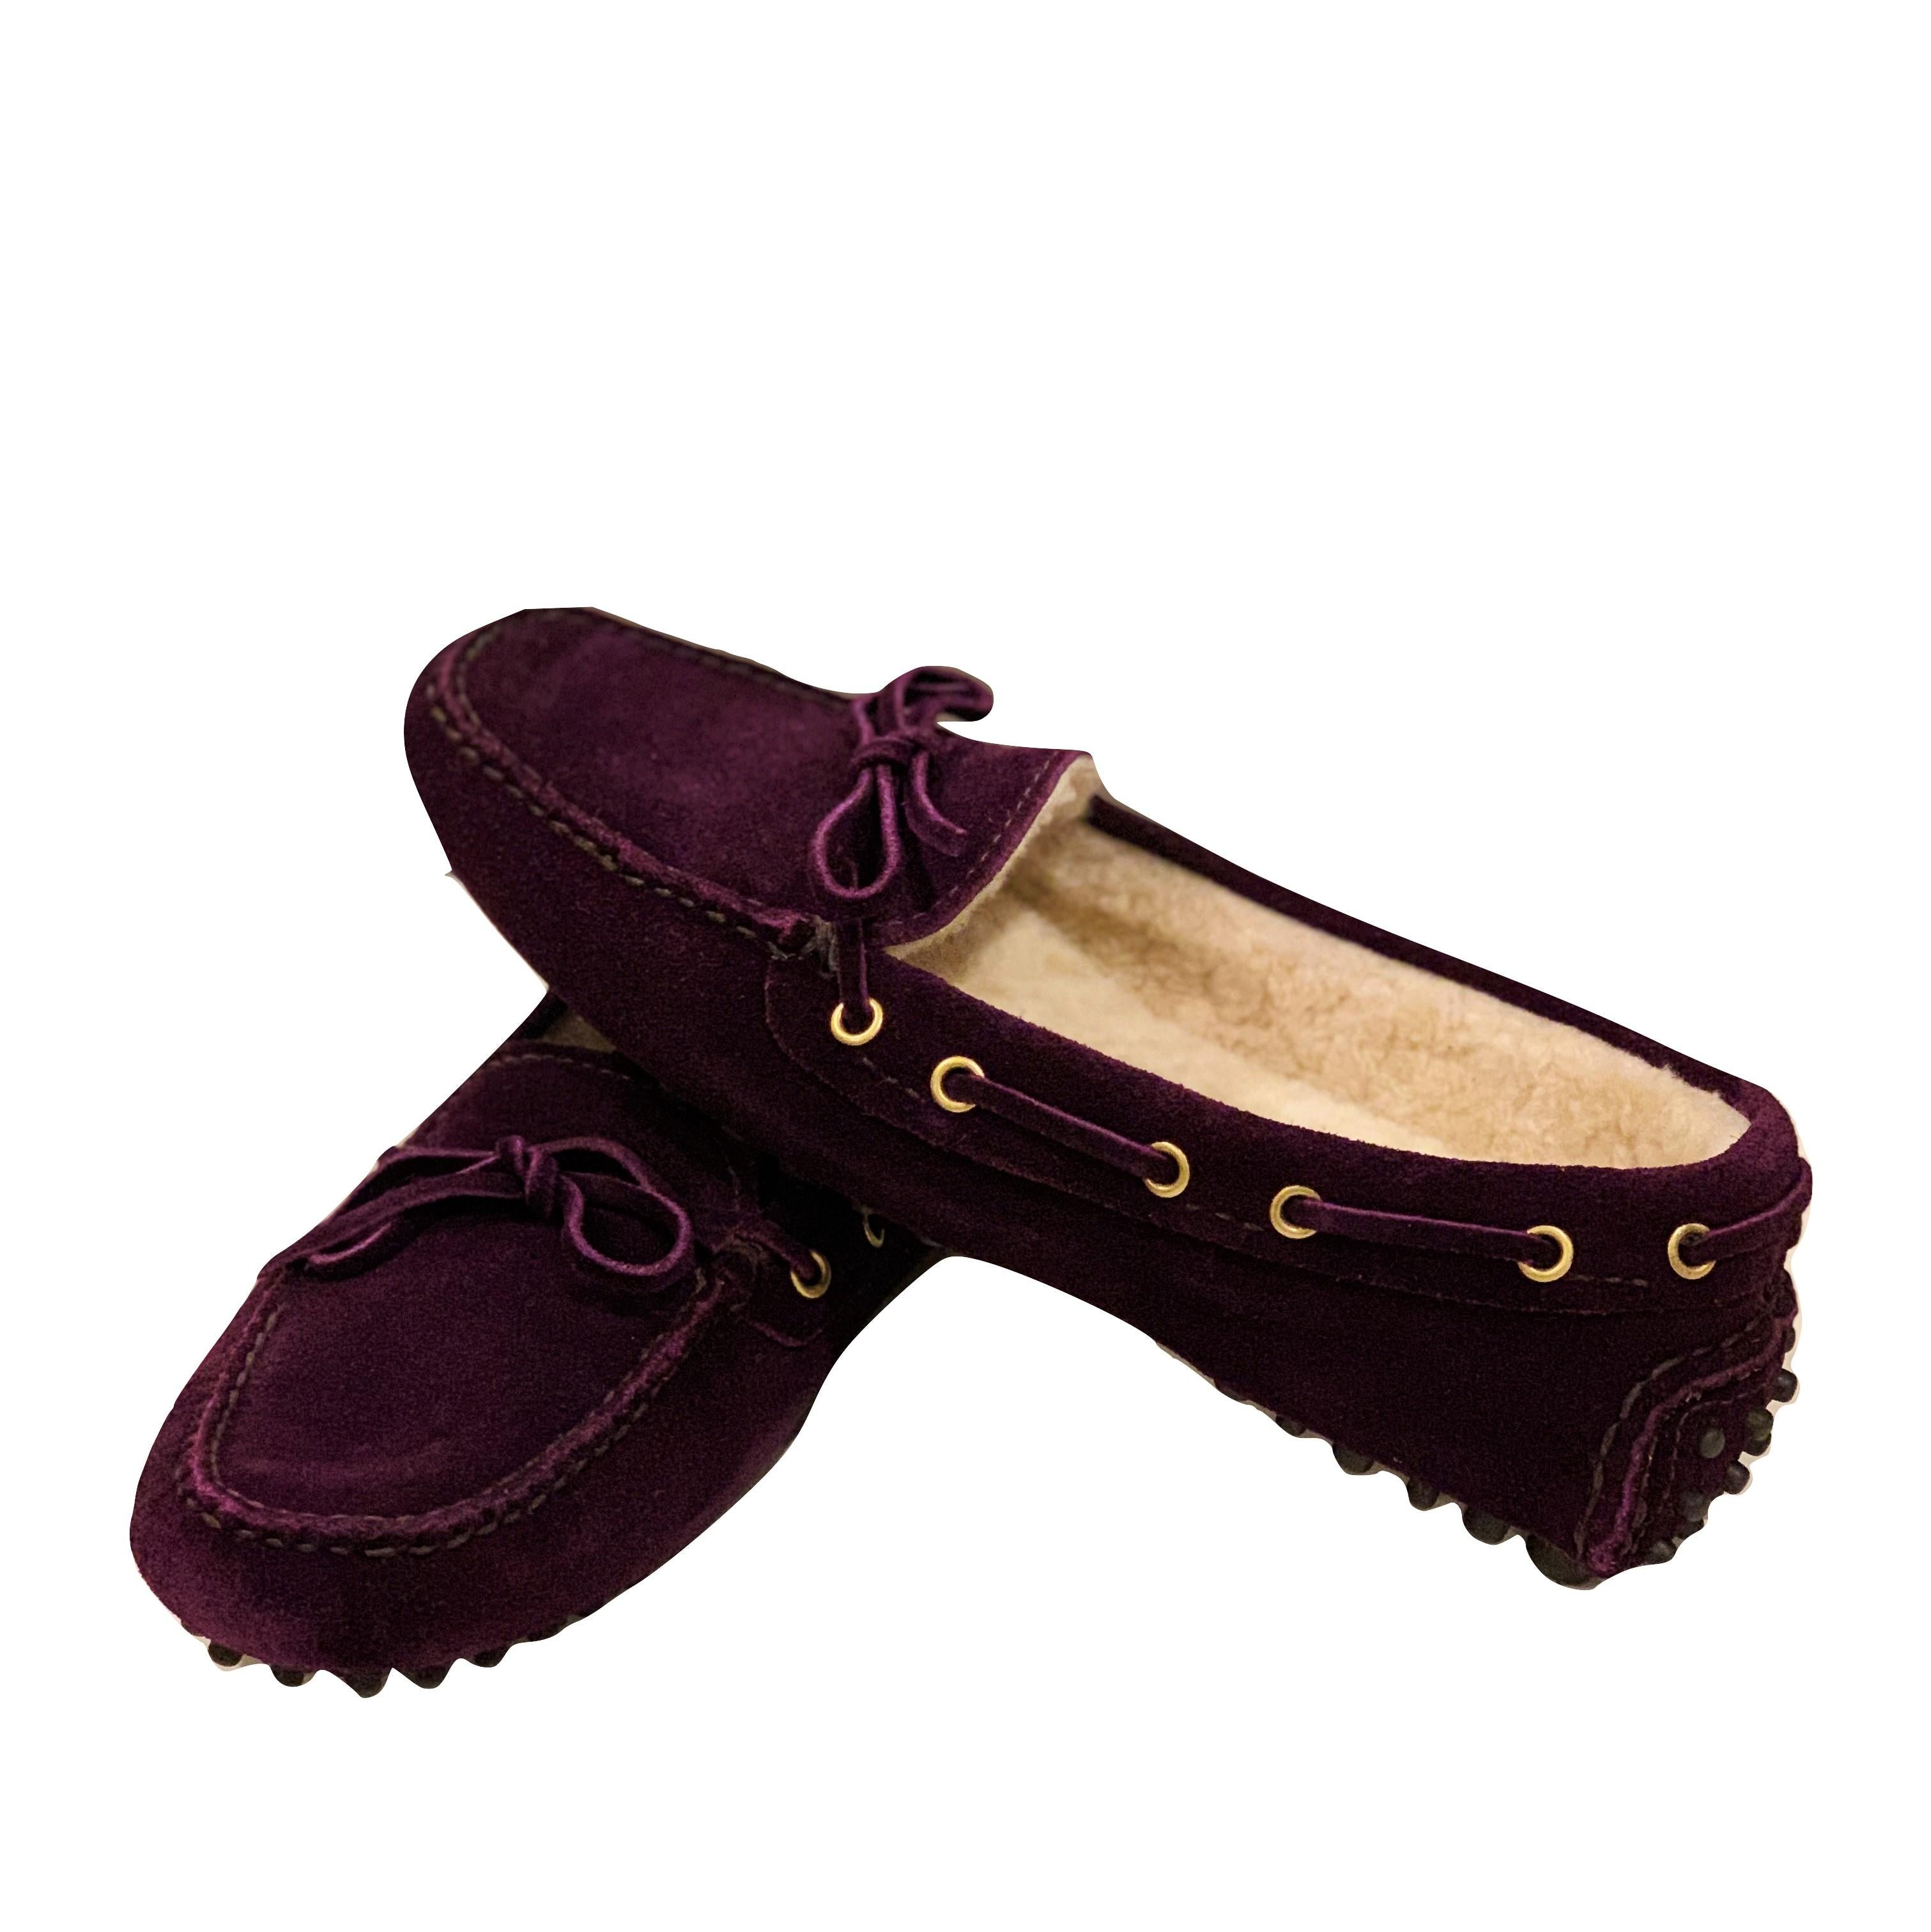  New The Original Prada Car Shoe Flat Moccasin Shearling House Driving  Sz 37 In New Condition In Leesburg, VA